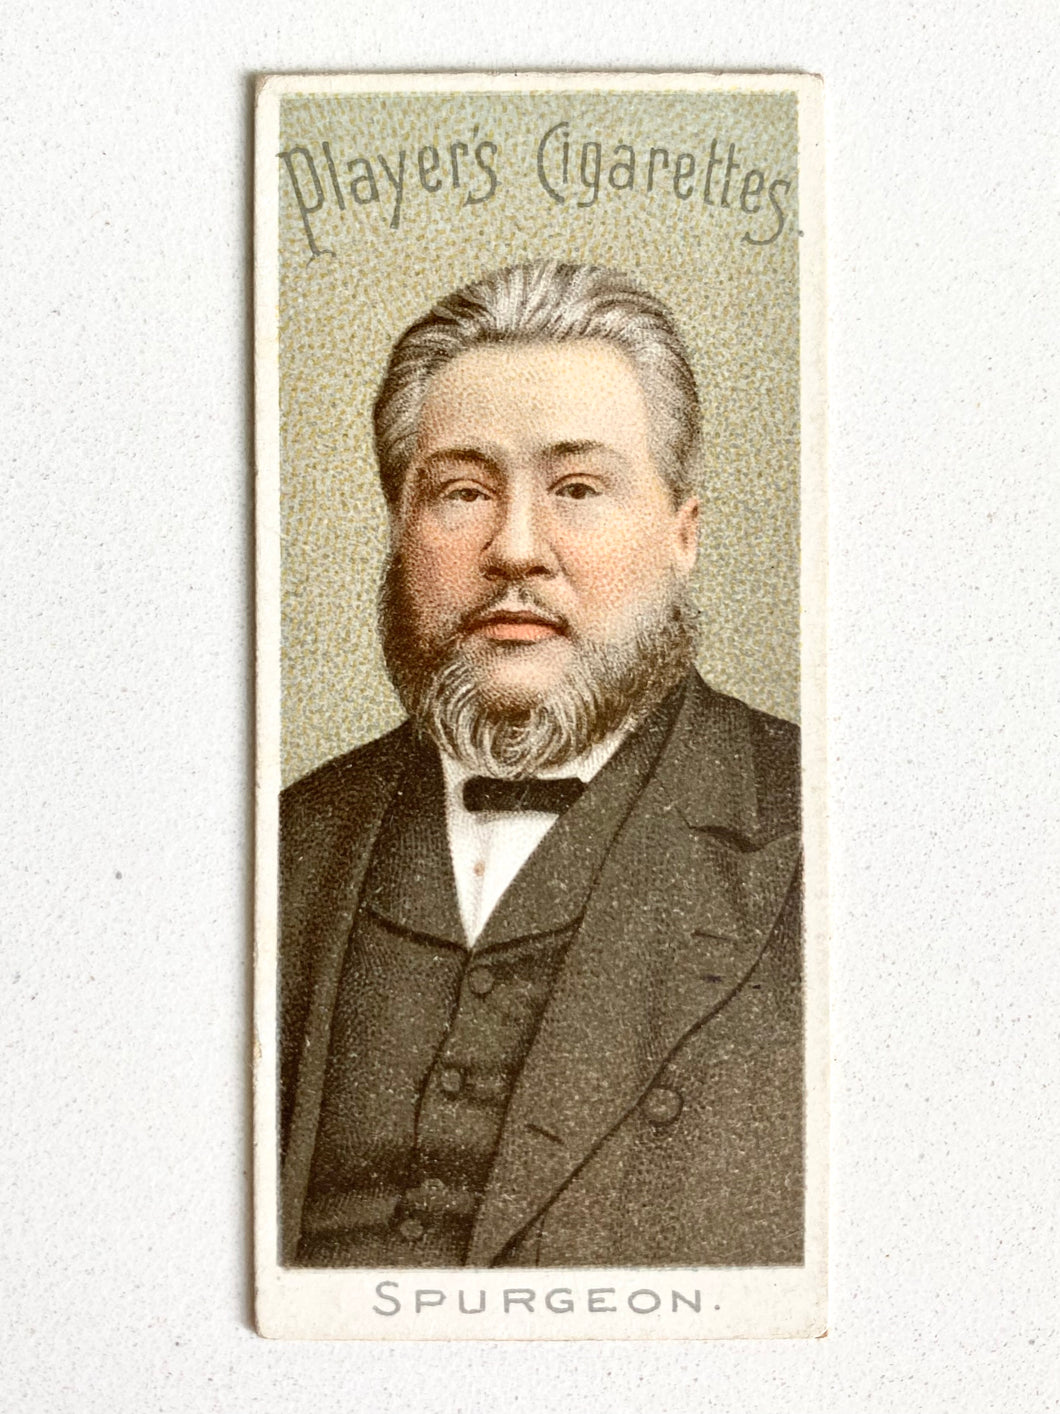 c.1880's C. H. SPURGEON. Victorian Lithographed Cigarette Card on God's Gift of Tobacco!